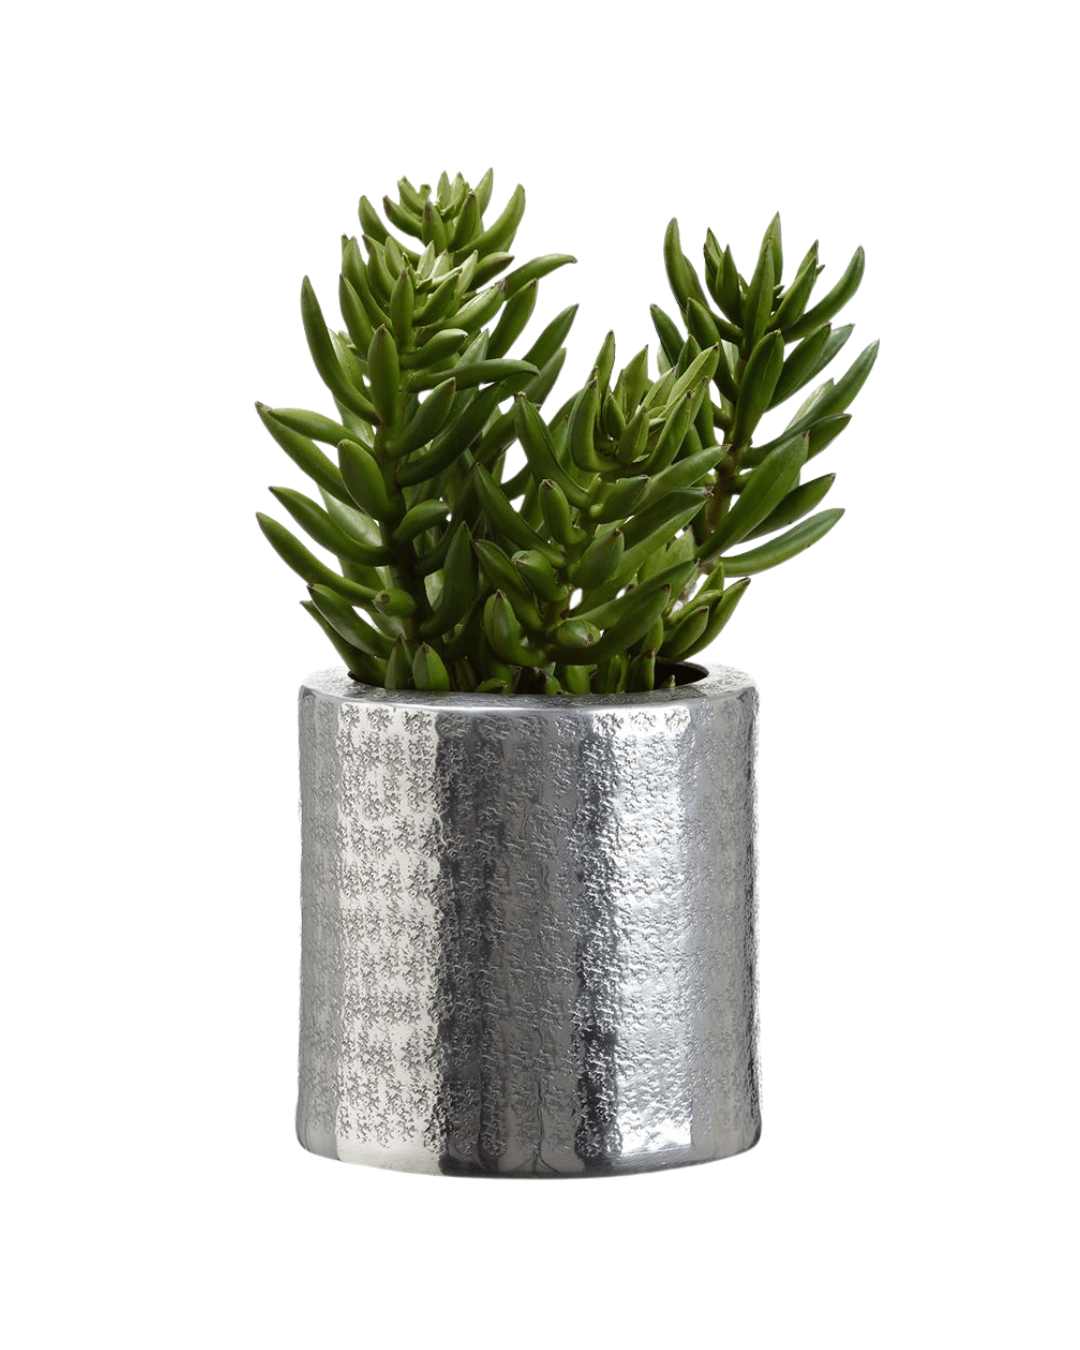 A 10.5&quot; Senecio in Aluminum Pot with fleshy green leaves growing in a shiny metallic silver pot against a white background in a Scottsdale, Arizona bungalow by AllState Floral And Craft.